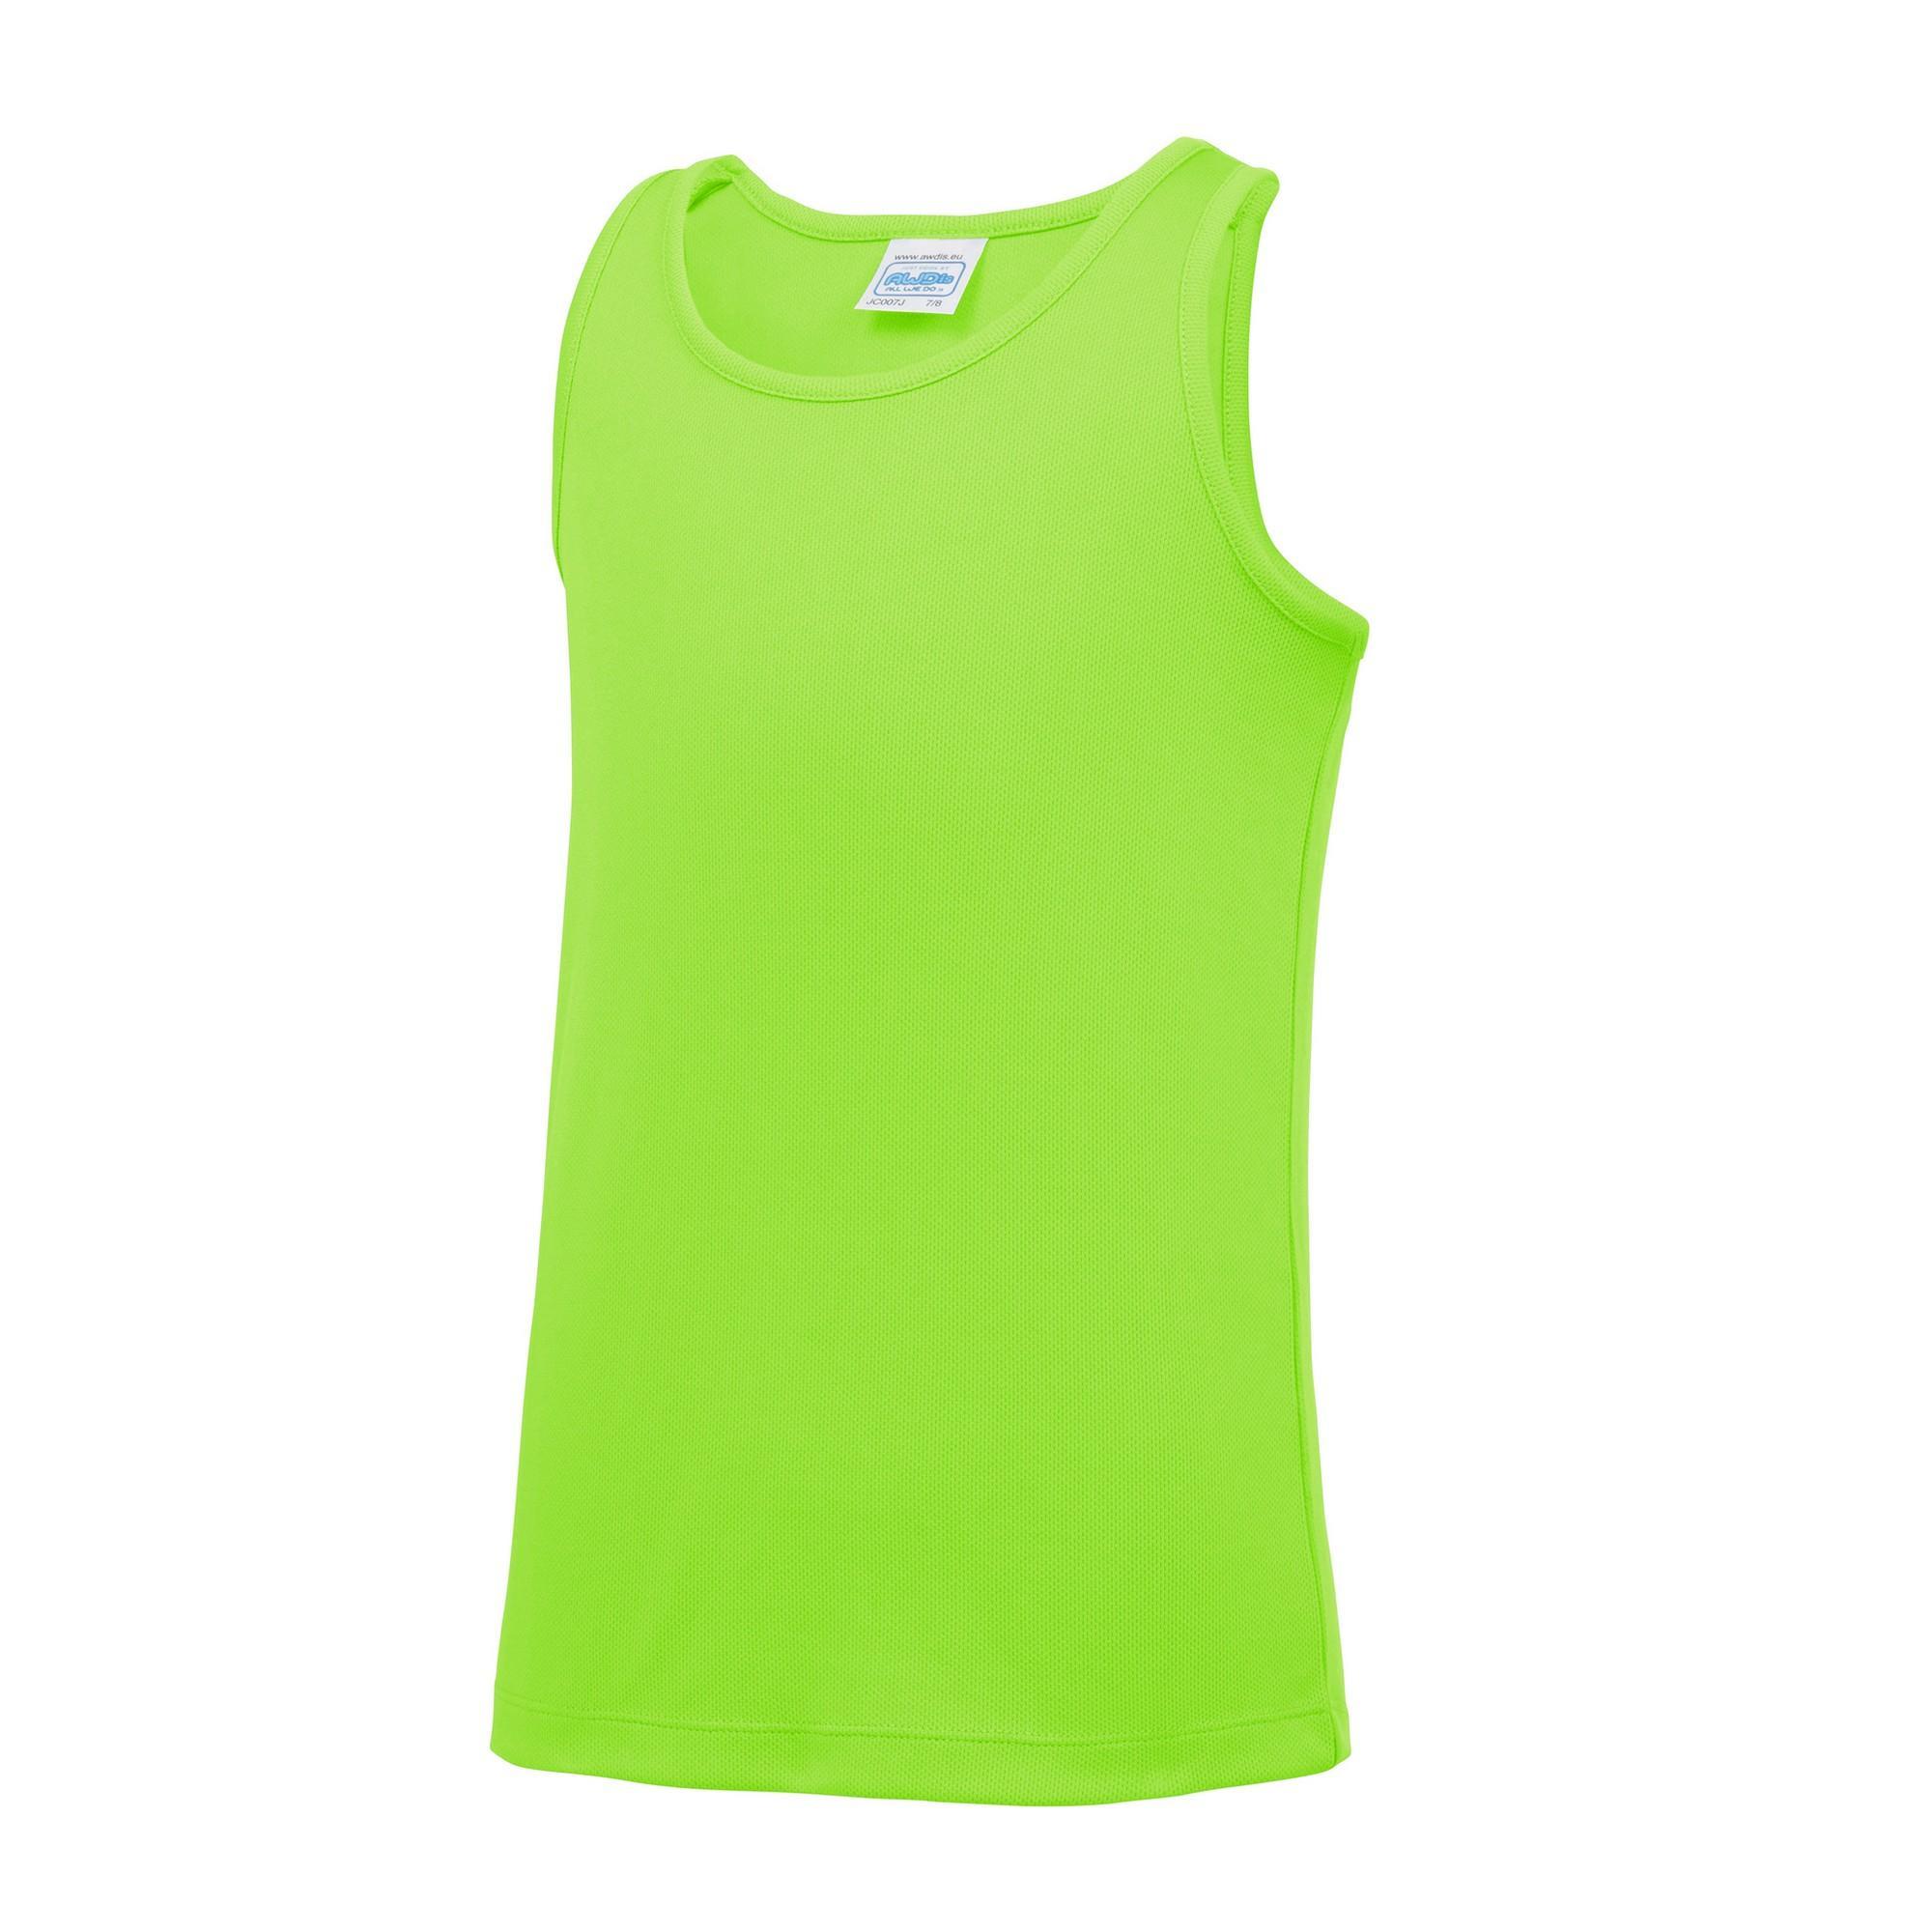 AWDis Just Cool Childrens/Kids Plain Sleeveless Vest Top (Electric Green) (3-4 Years)